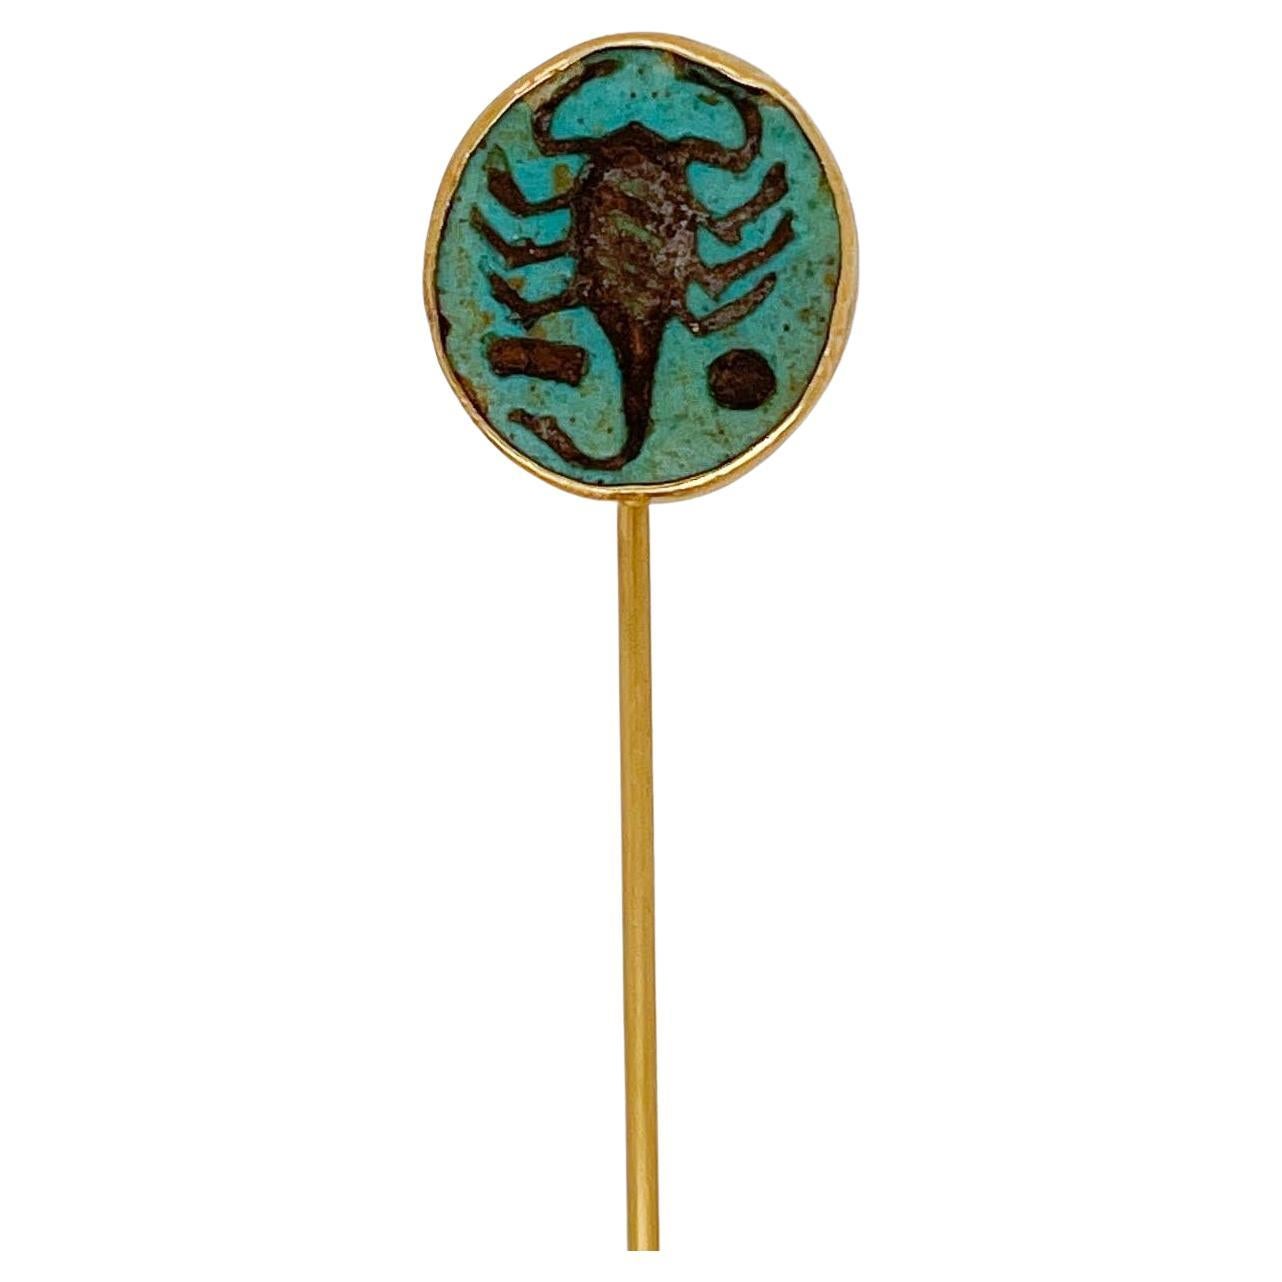 Antique Egyptian Revival 14K Gold & Faience Scorpion Stick Pin